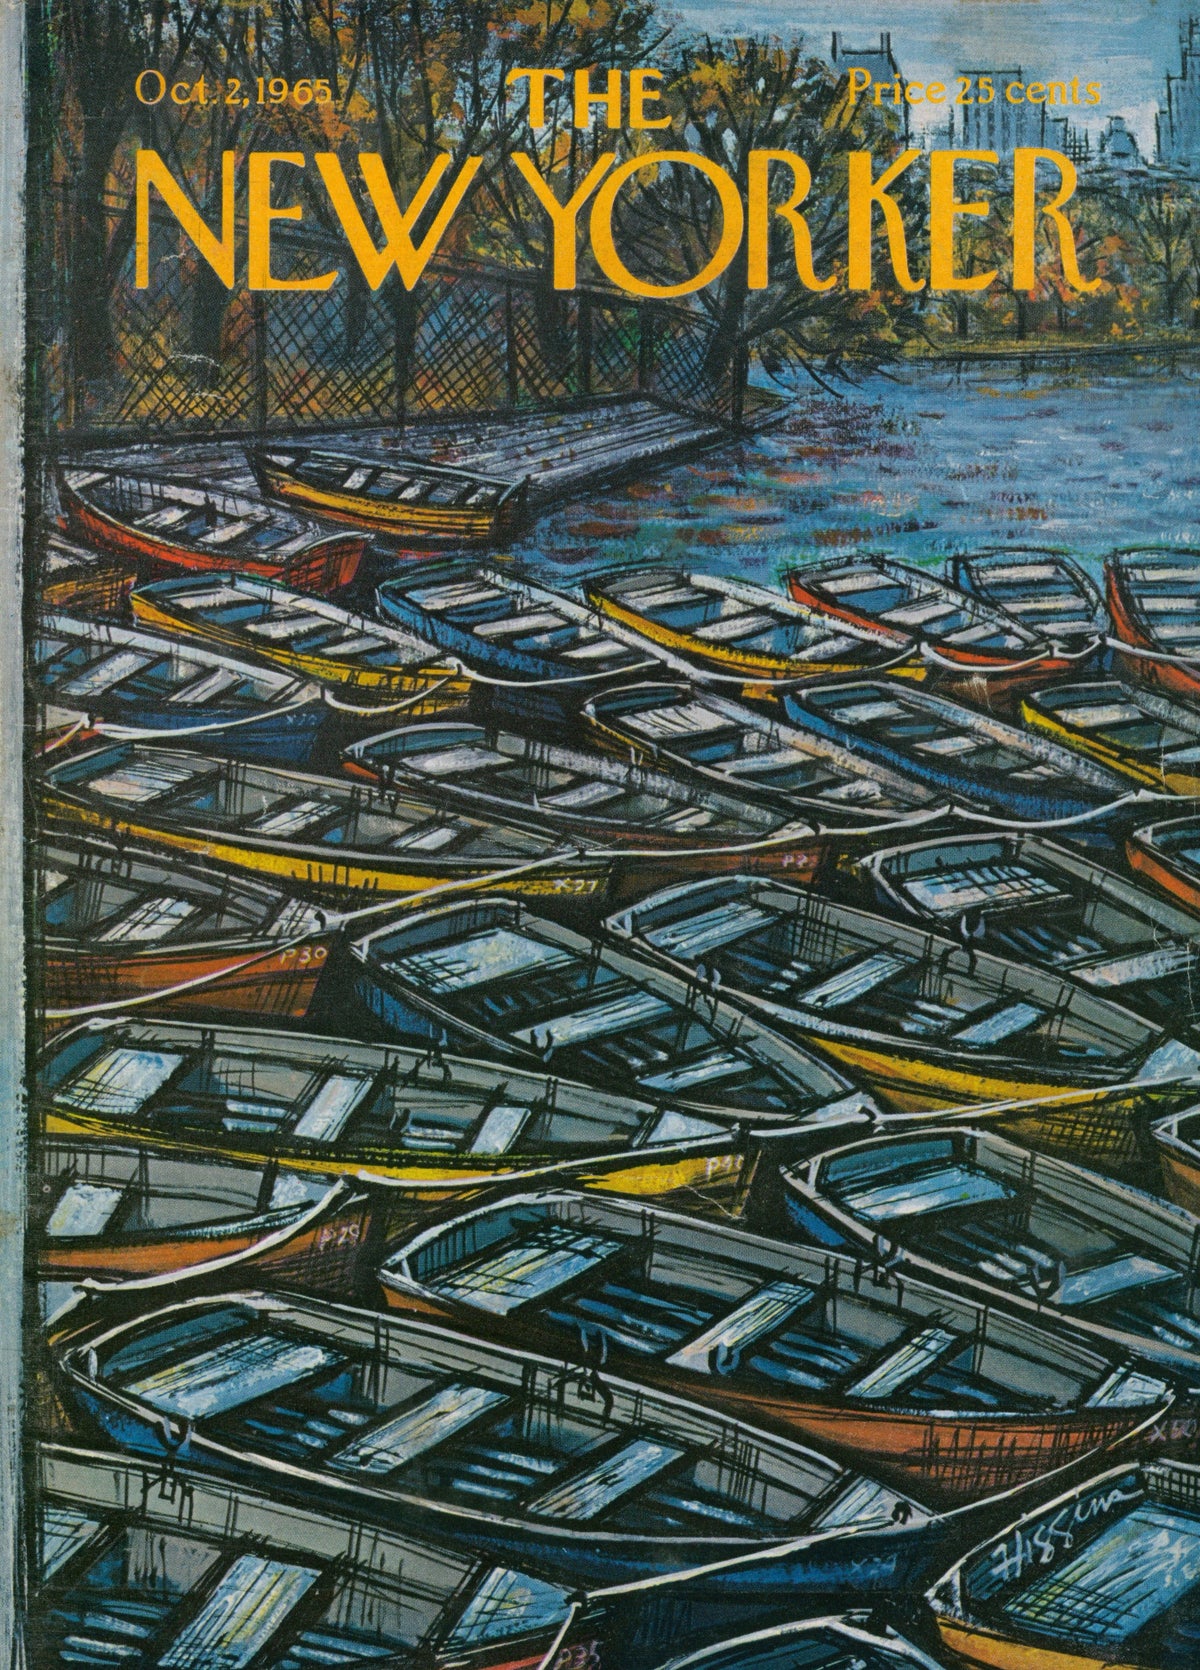 Rowboats- The New Yorker - Authentic Vintage Antique Print